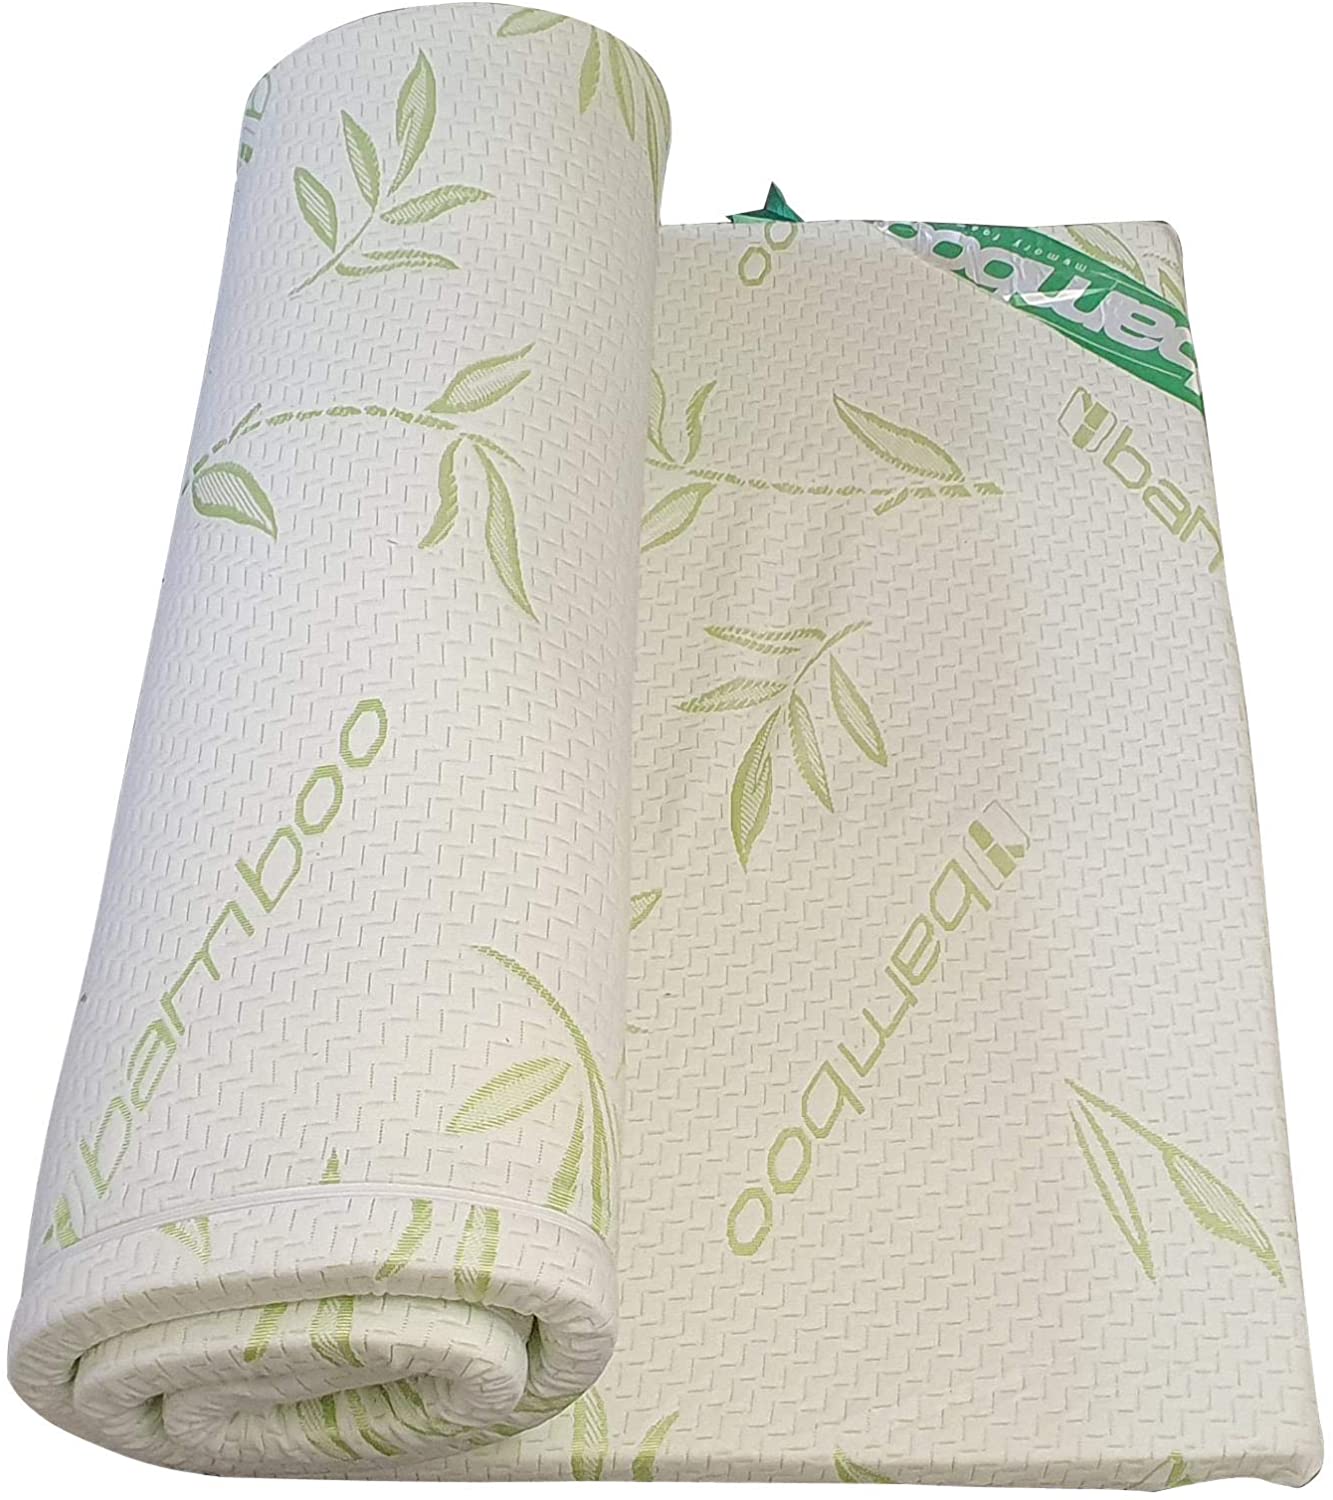 Bamboo Memory Foam Mattress Topper Enhancer - Pressure Relief Soft Toppers With Removable Cover